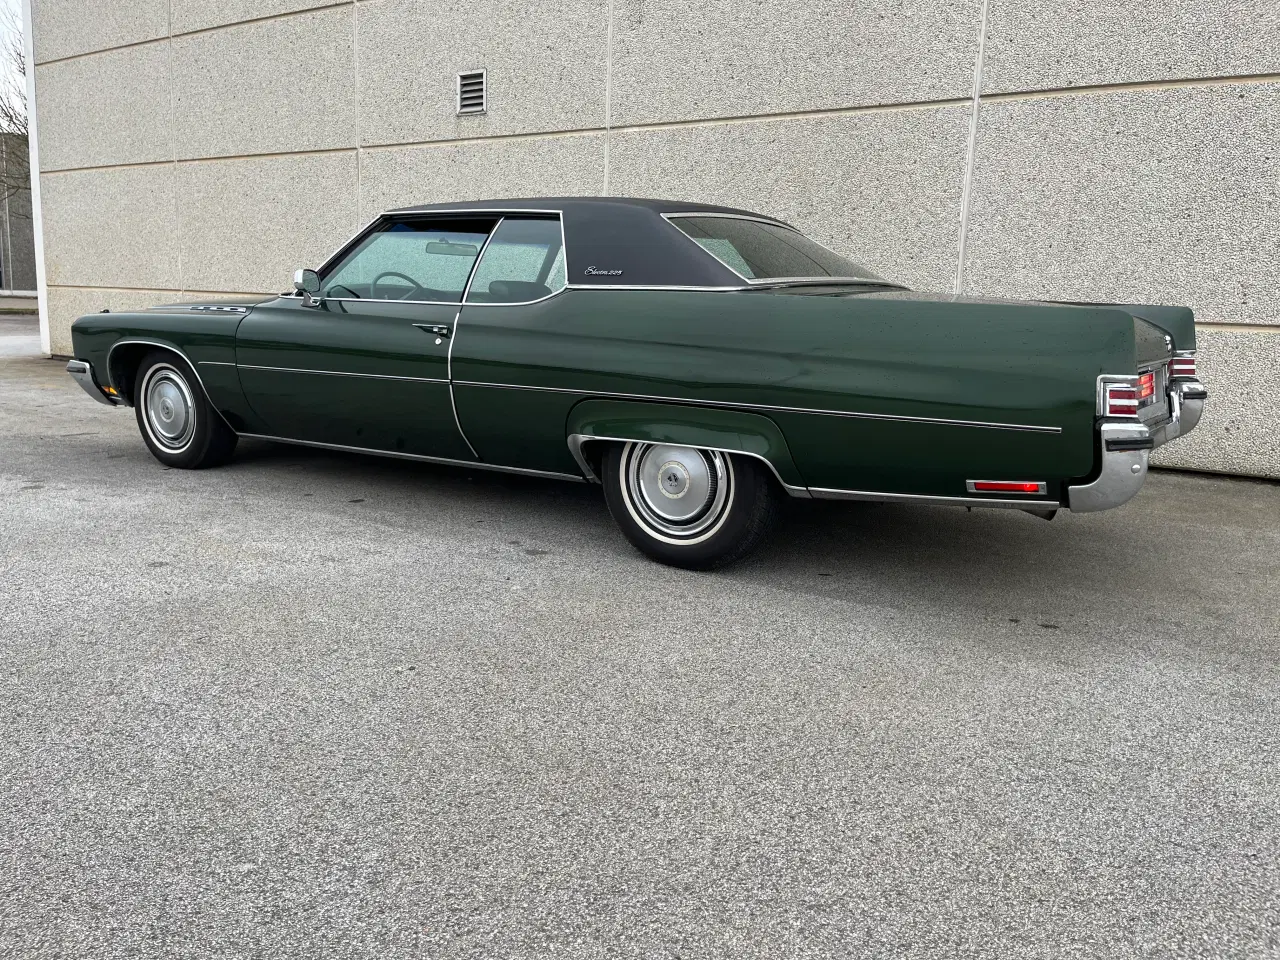 Billede 5 - Buick Electra 225 coupe